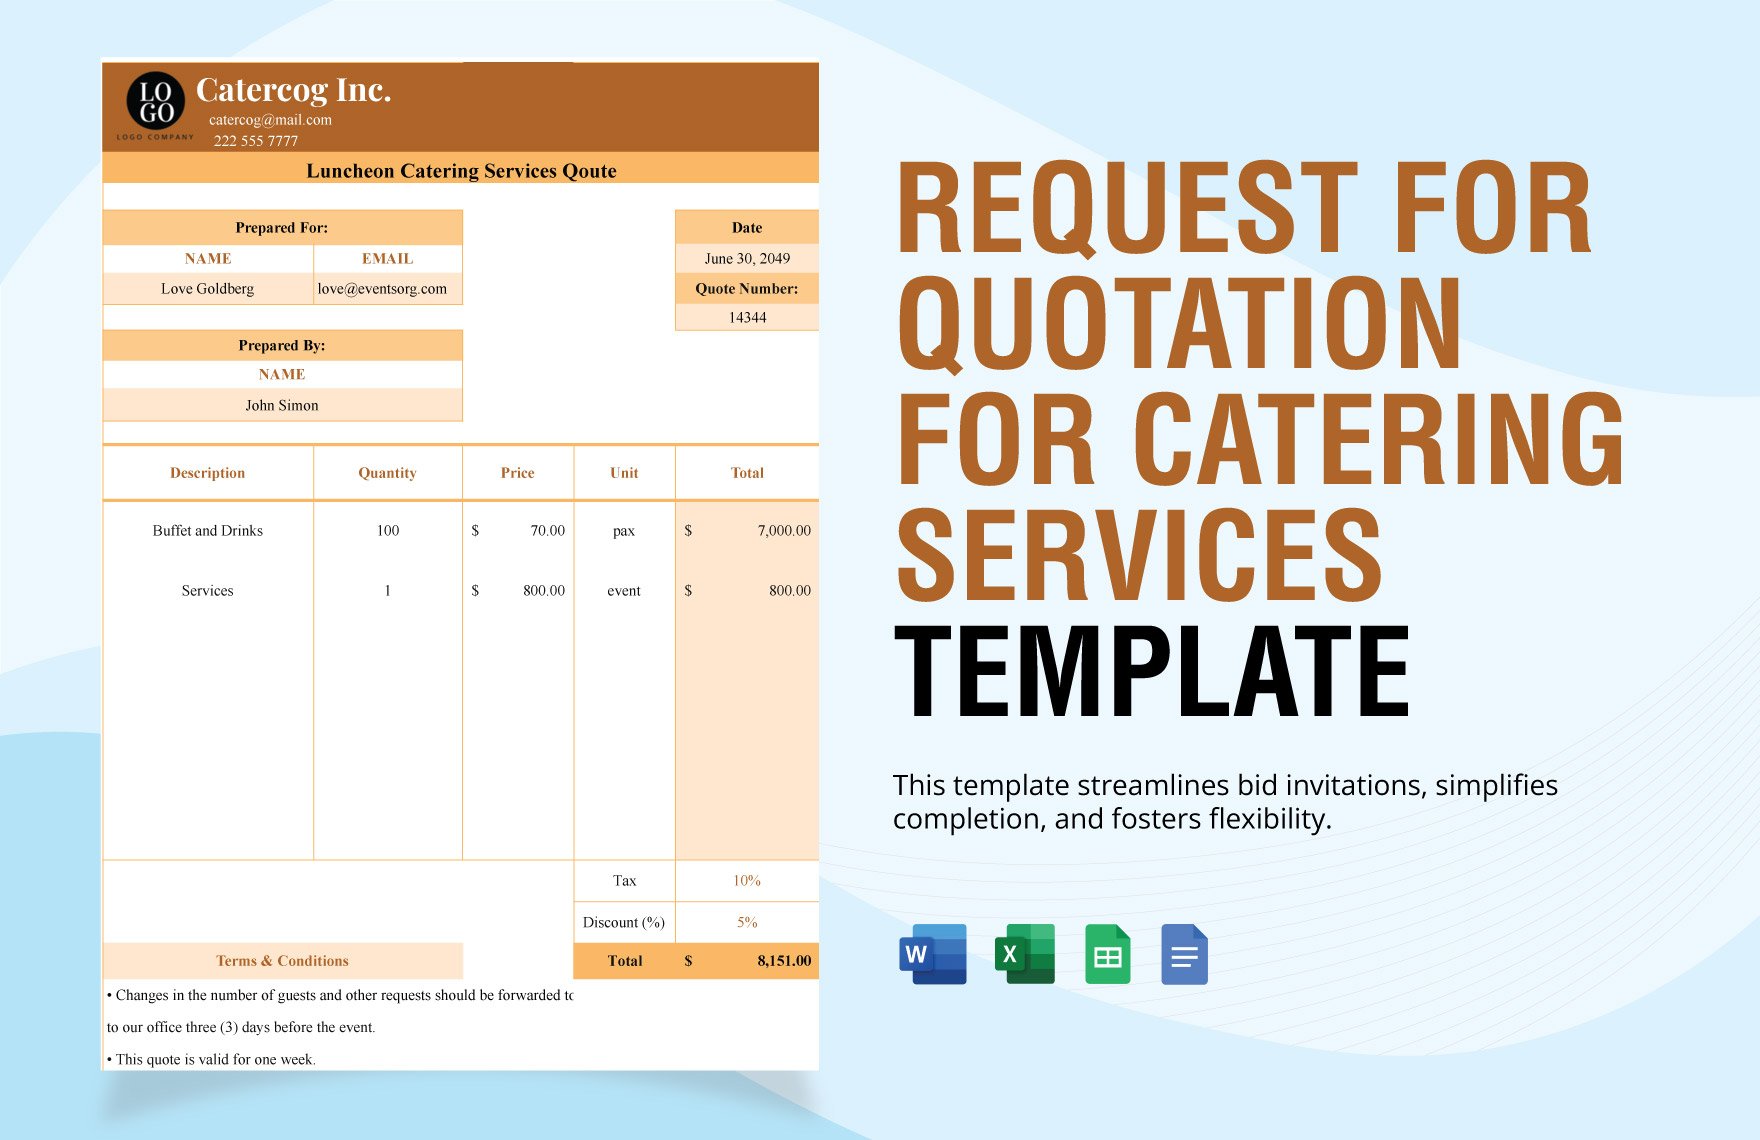 Free Request for Quotation for Catering Services Template in Word, Google Docs, Excel, Google Sheets